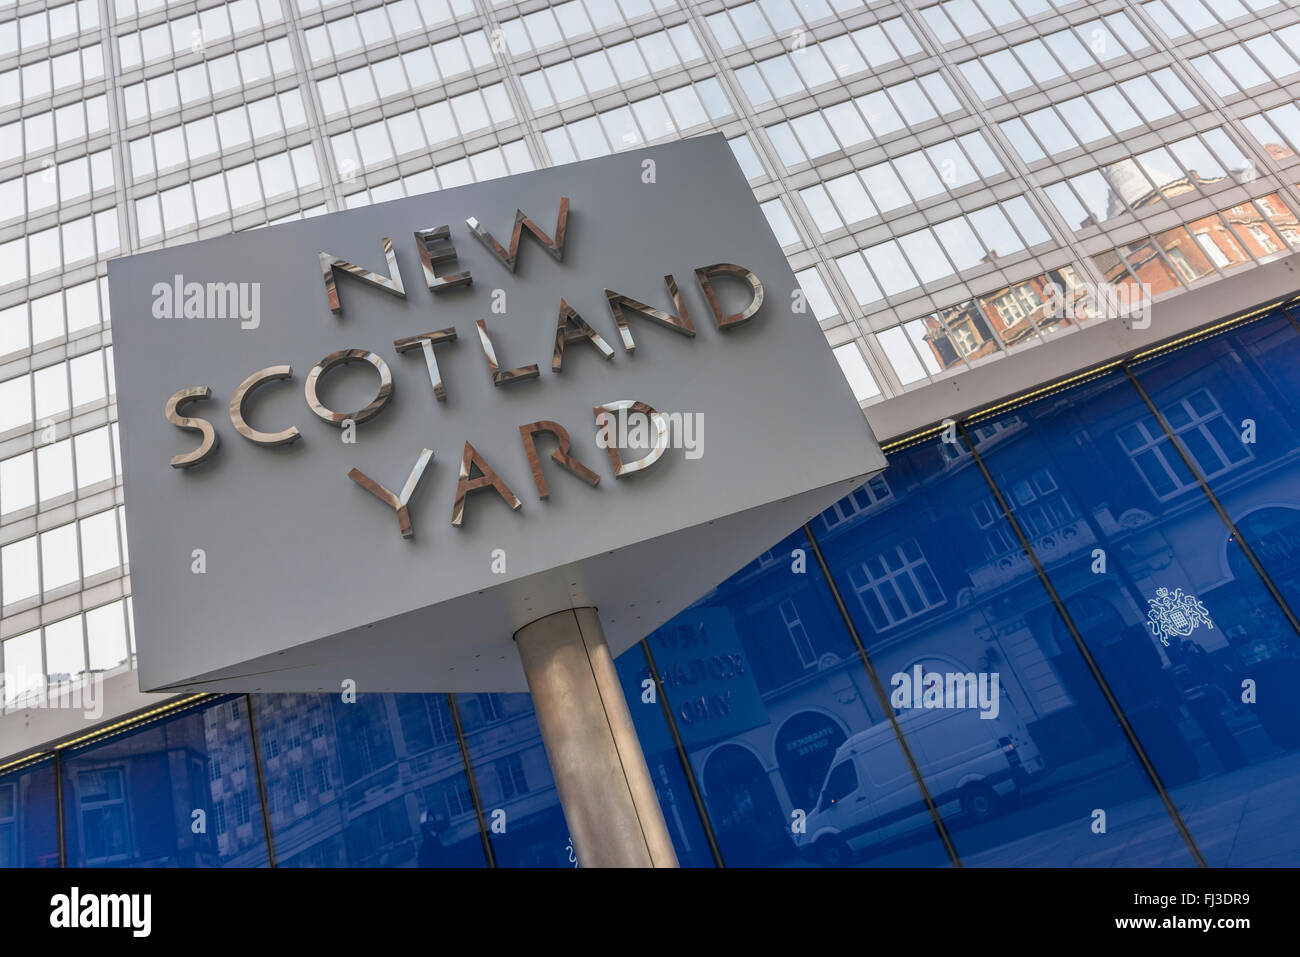 This triangular, revolving, sign stands outside New Scotland Yard which is the headquarters of the Metropolitan Police Service. Stock Photo